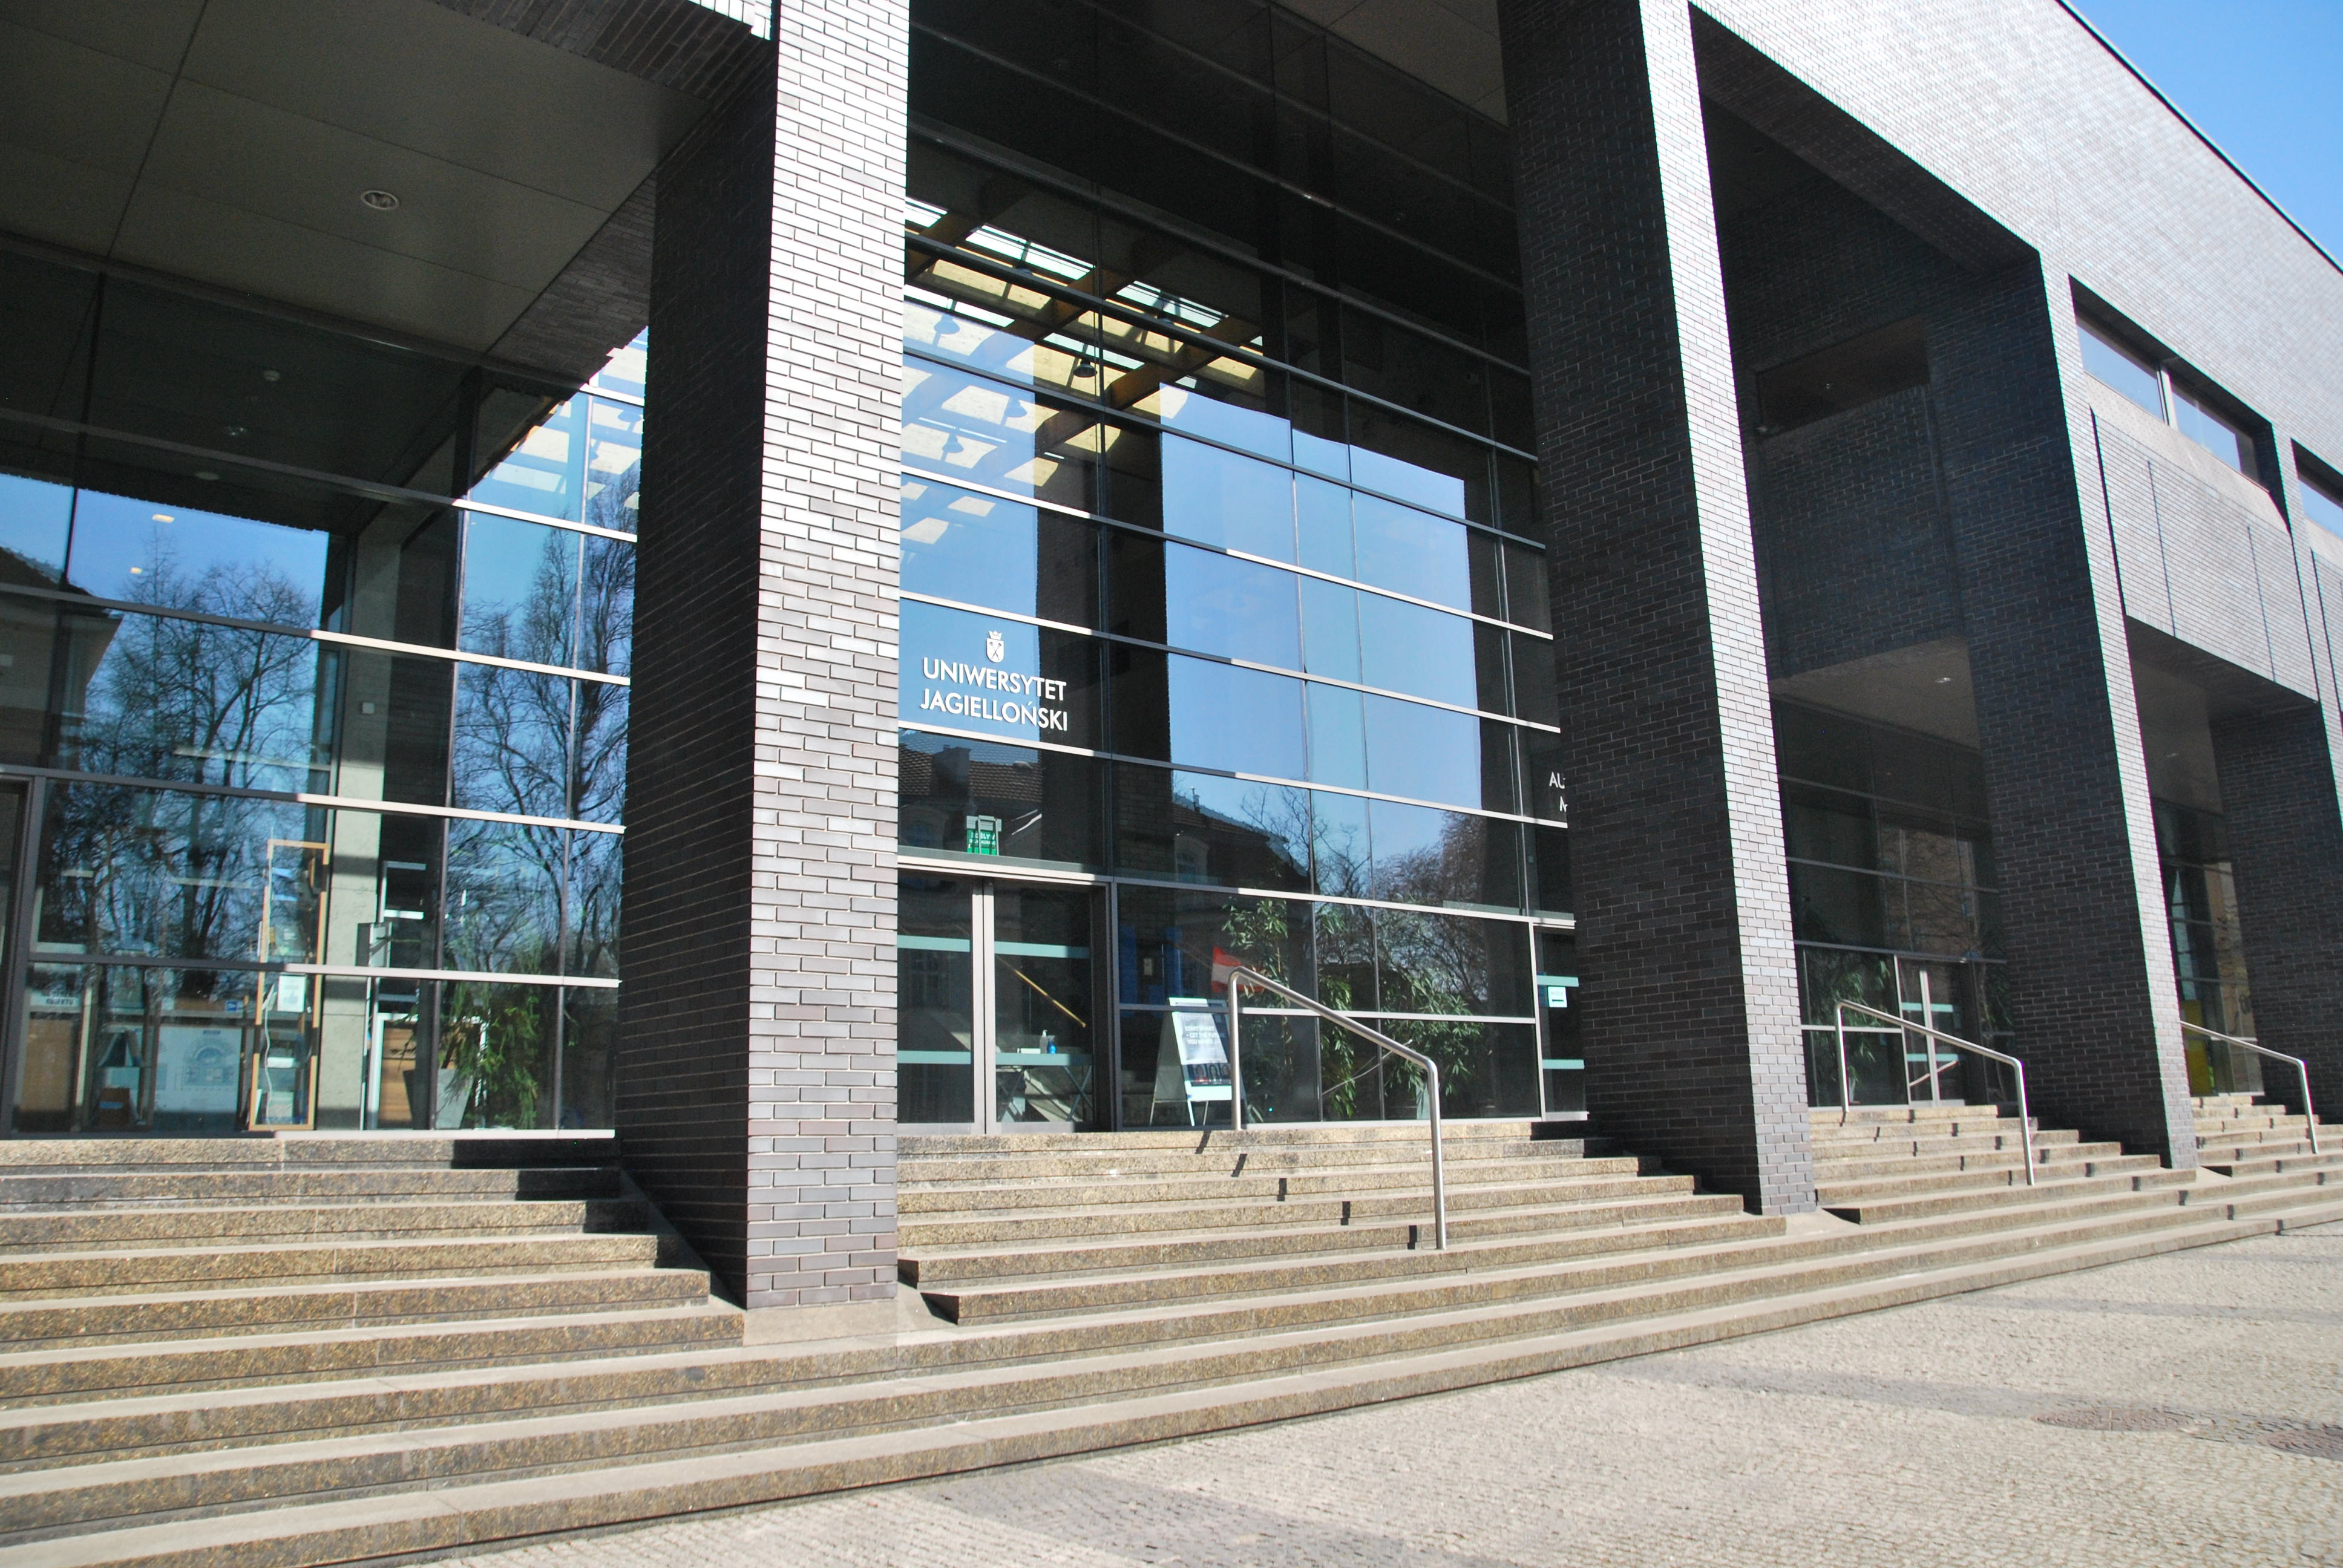 The main entrance to the Auditorium Maximum. It is located in the glass façade, between two columns. Stairs with handrails lead to the entrance.